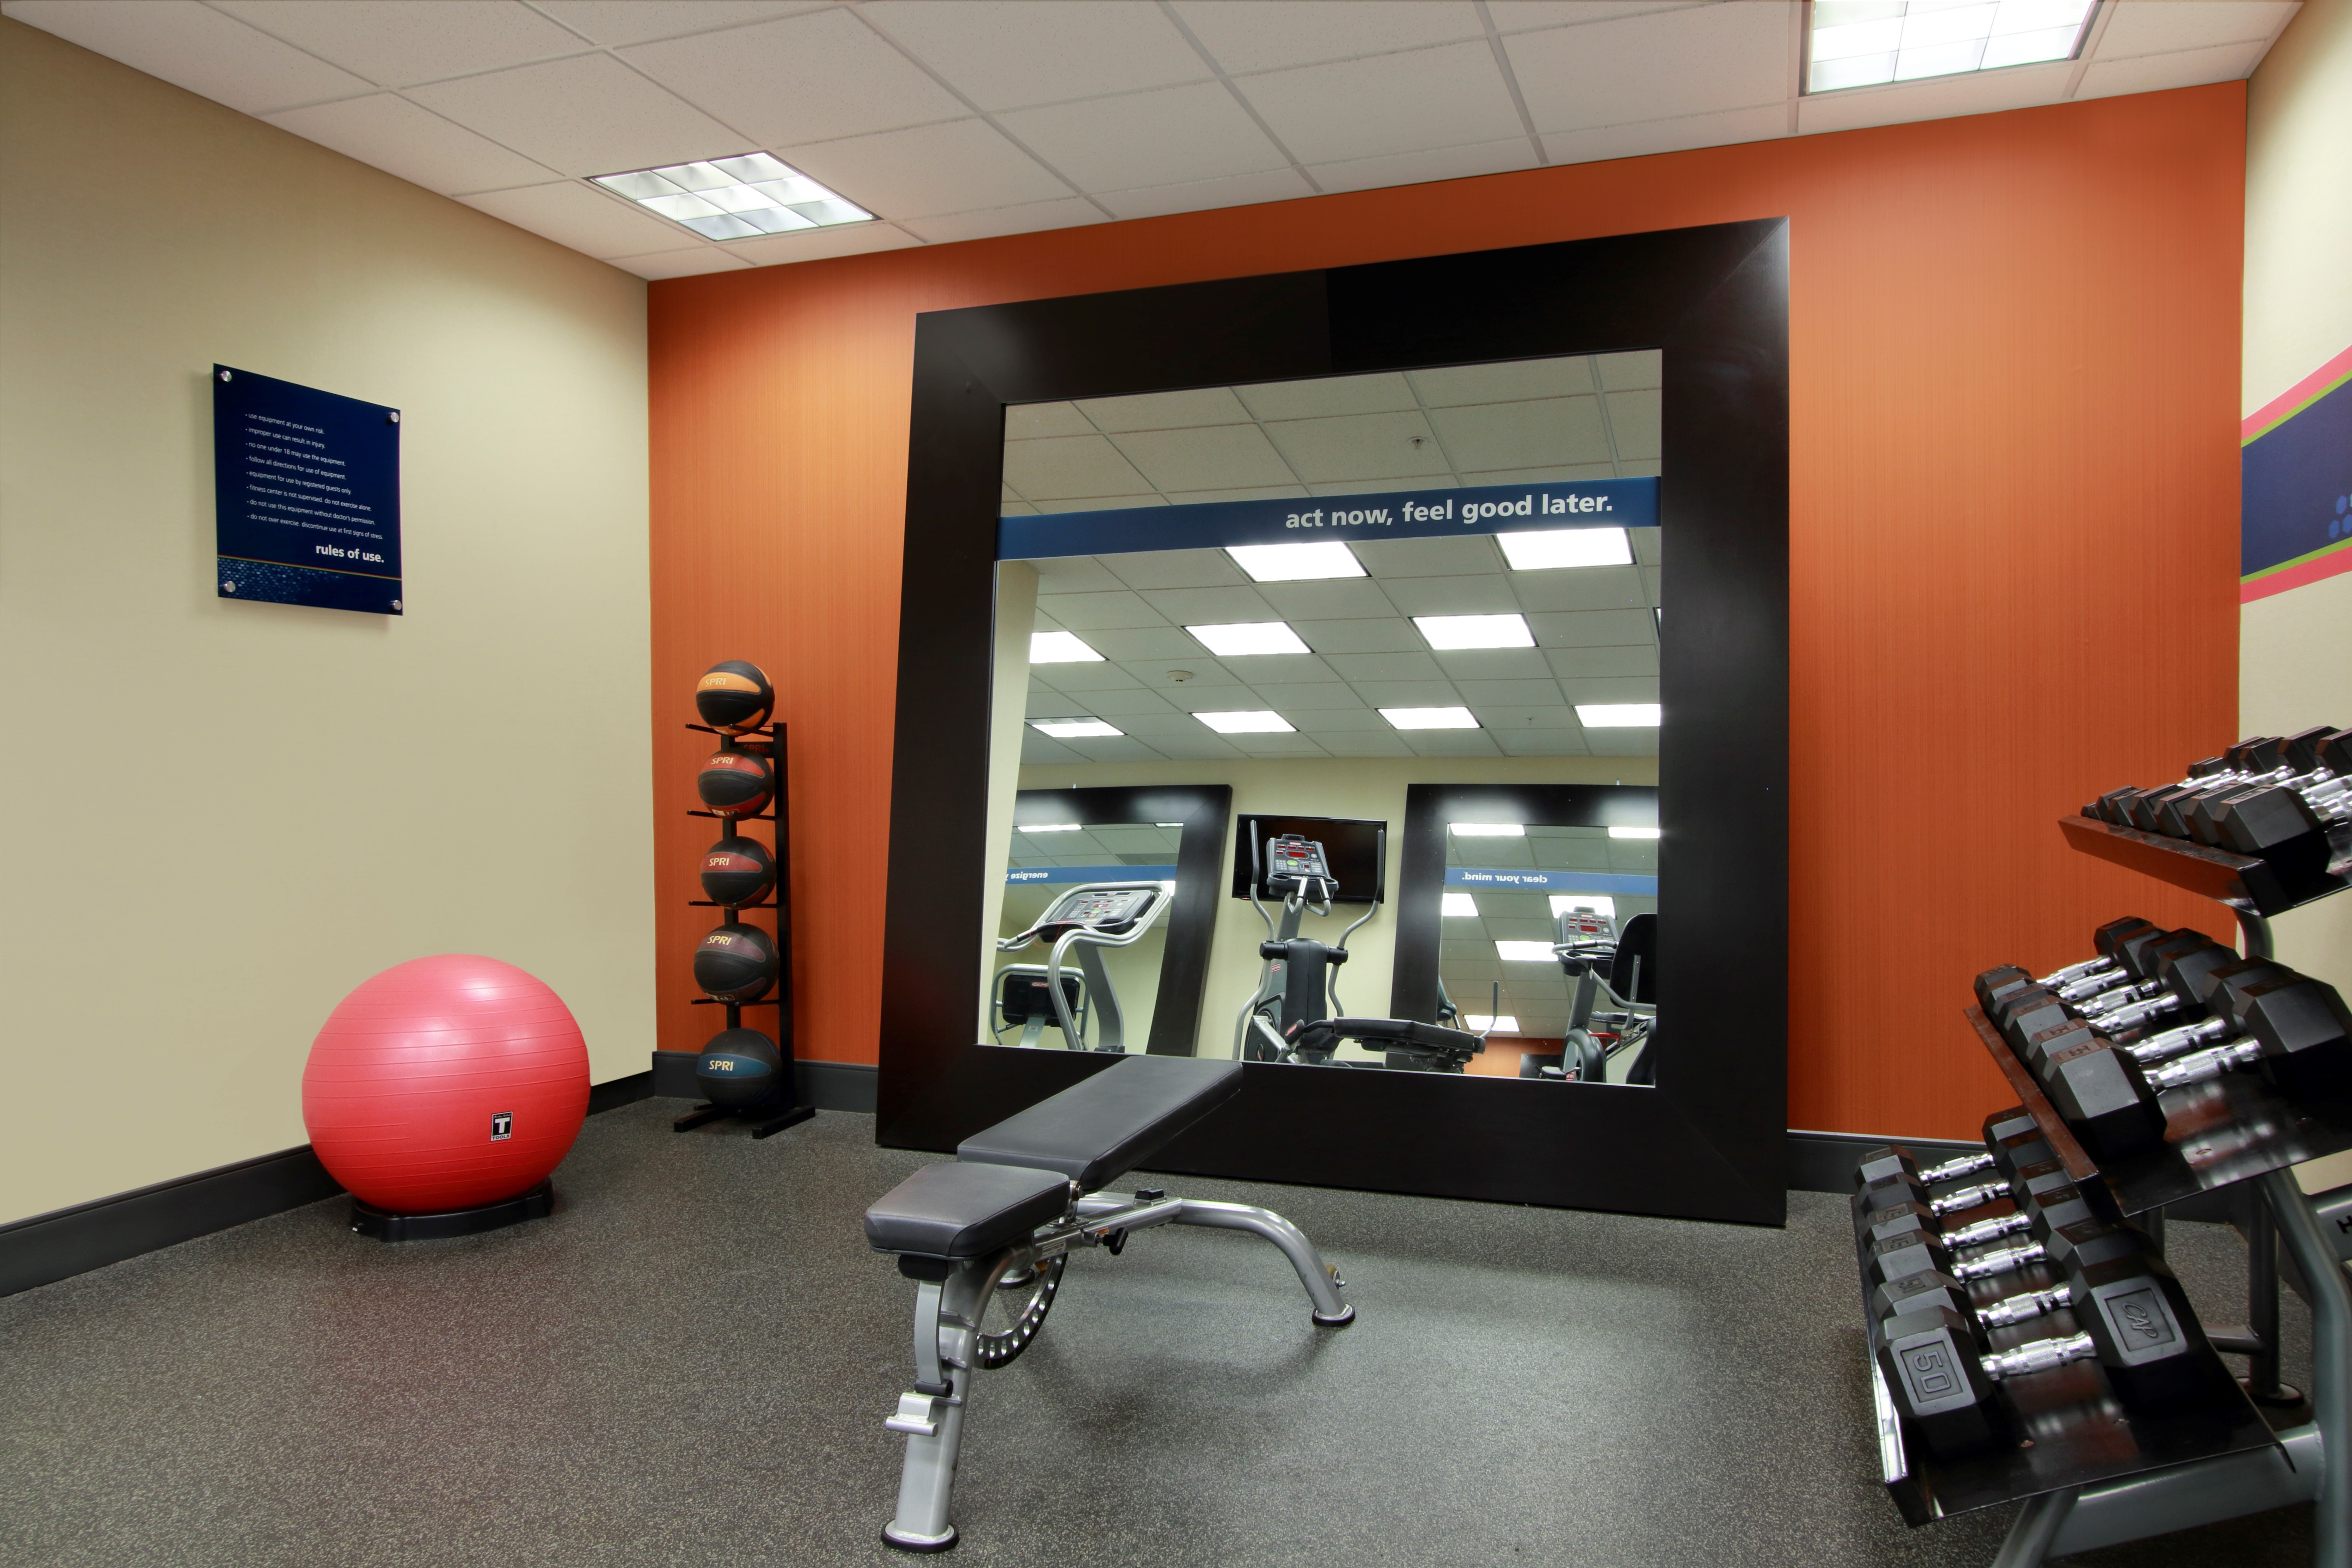 Fitness Center With Free Weights, Weight Bench, Red Stability Ball, Weight Balls, and Cardio Equipment Reflected in Large Mirror